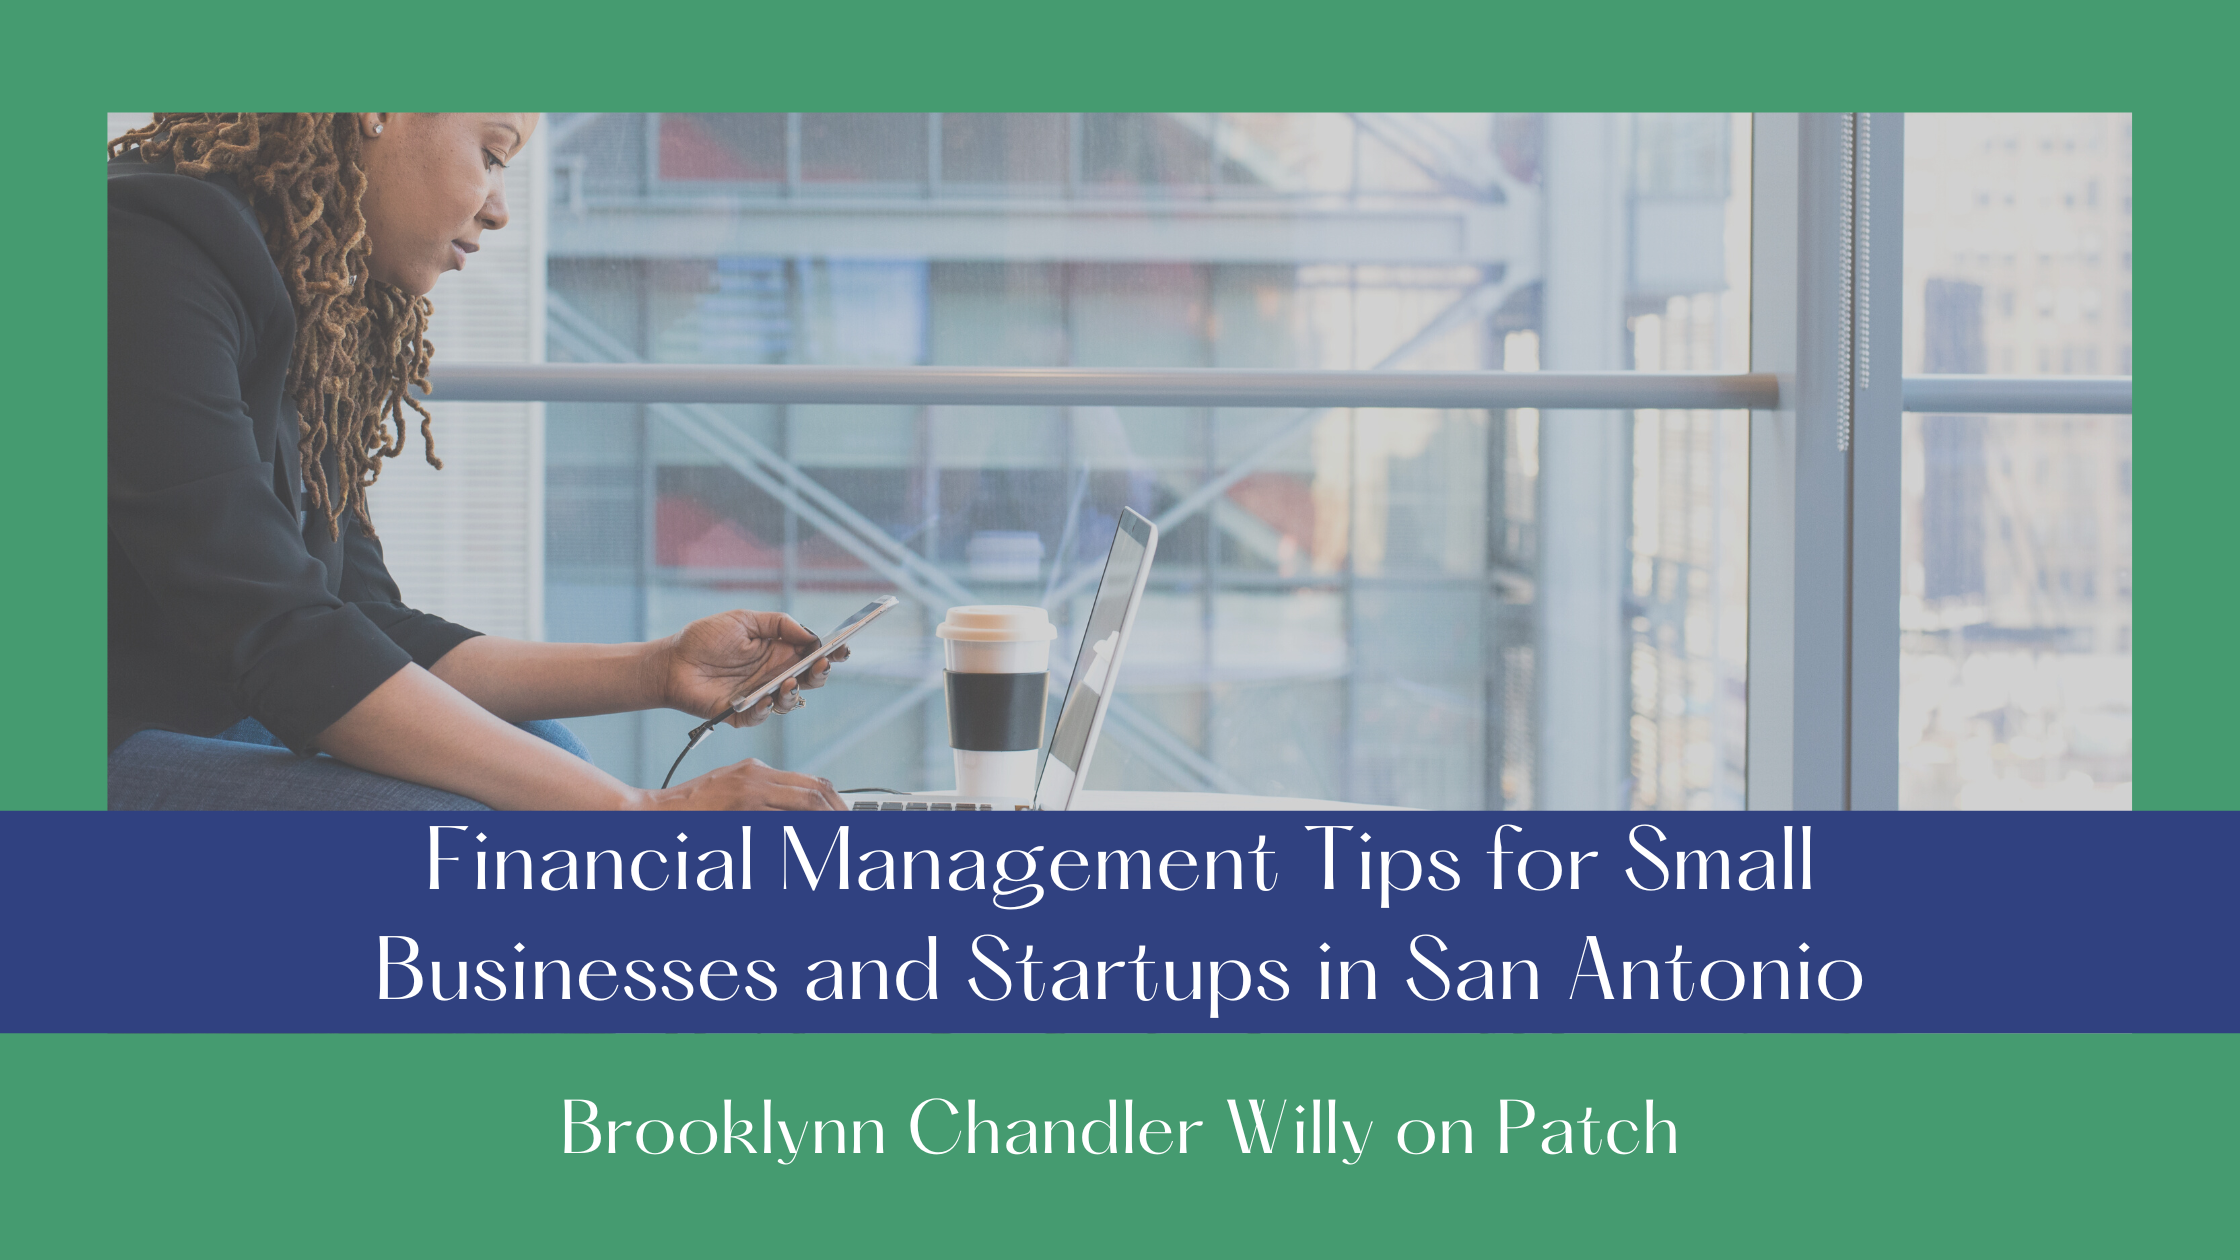 Financial Management Tips for Small
Businesses and Startups in San Antonio

Brooklvnn Chandler Willy on Patch